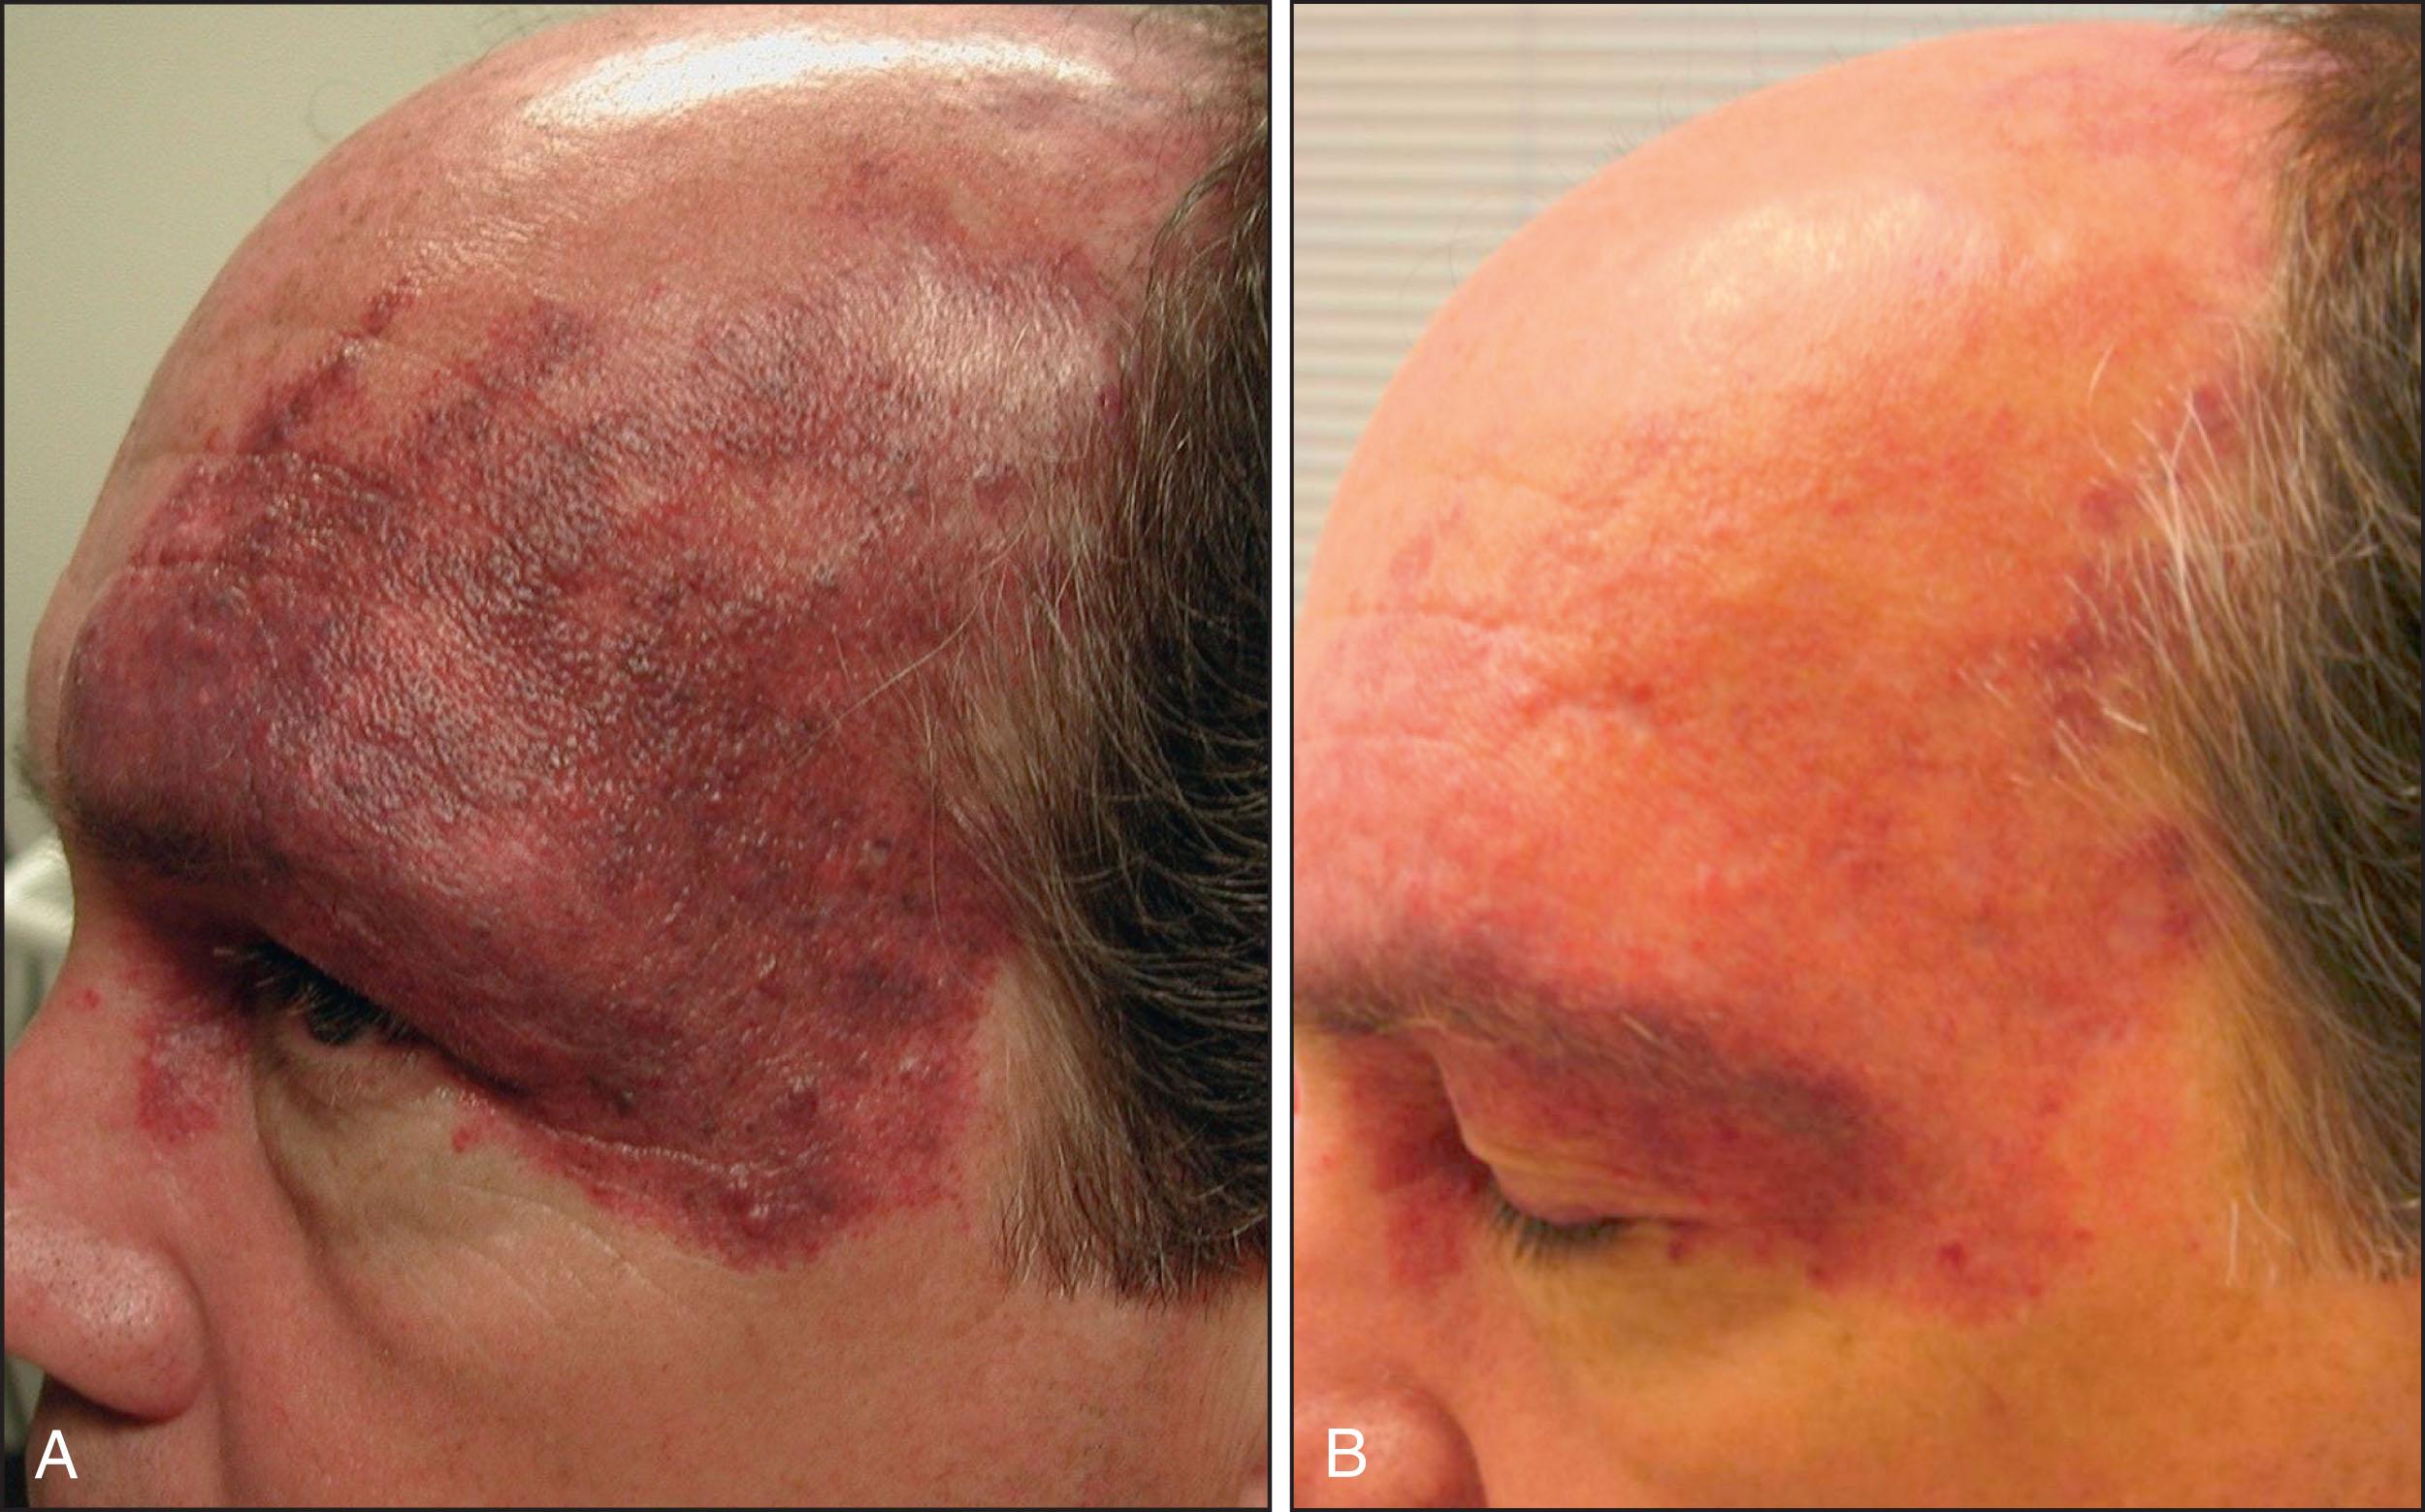 Fig. 2.4, Violaceous, hypertrophic port-wine birthmark: (A) before and (B) after alexandrite laser treatments. Note improvement in color and thickness.